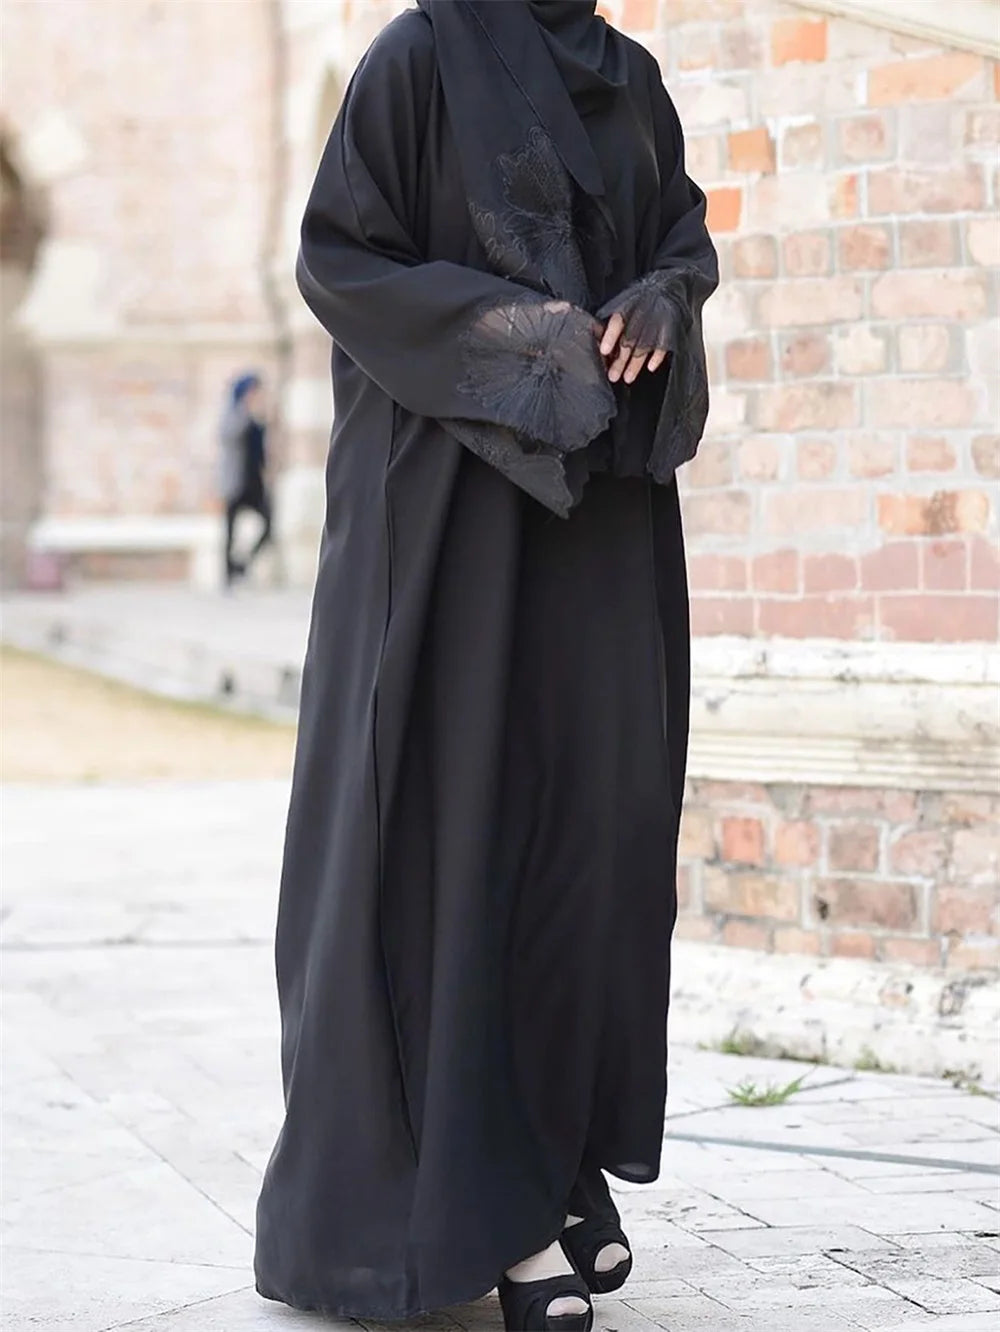 Floral Lace Modest Abaya Dress With Scarf